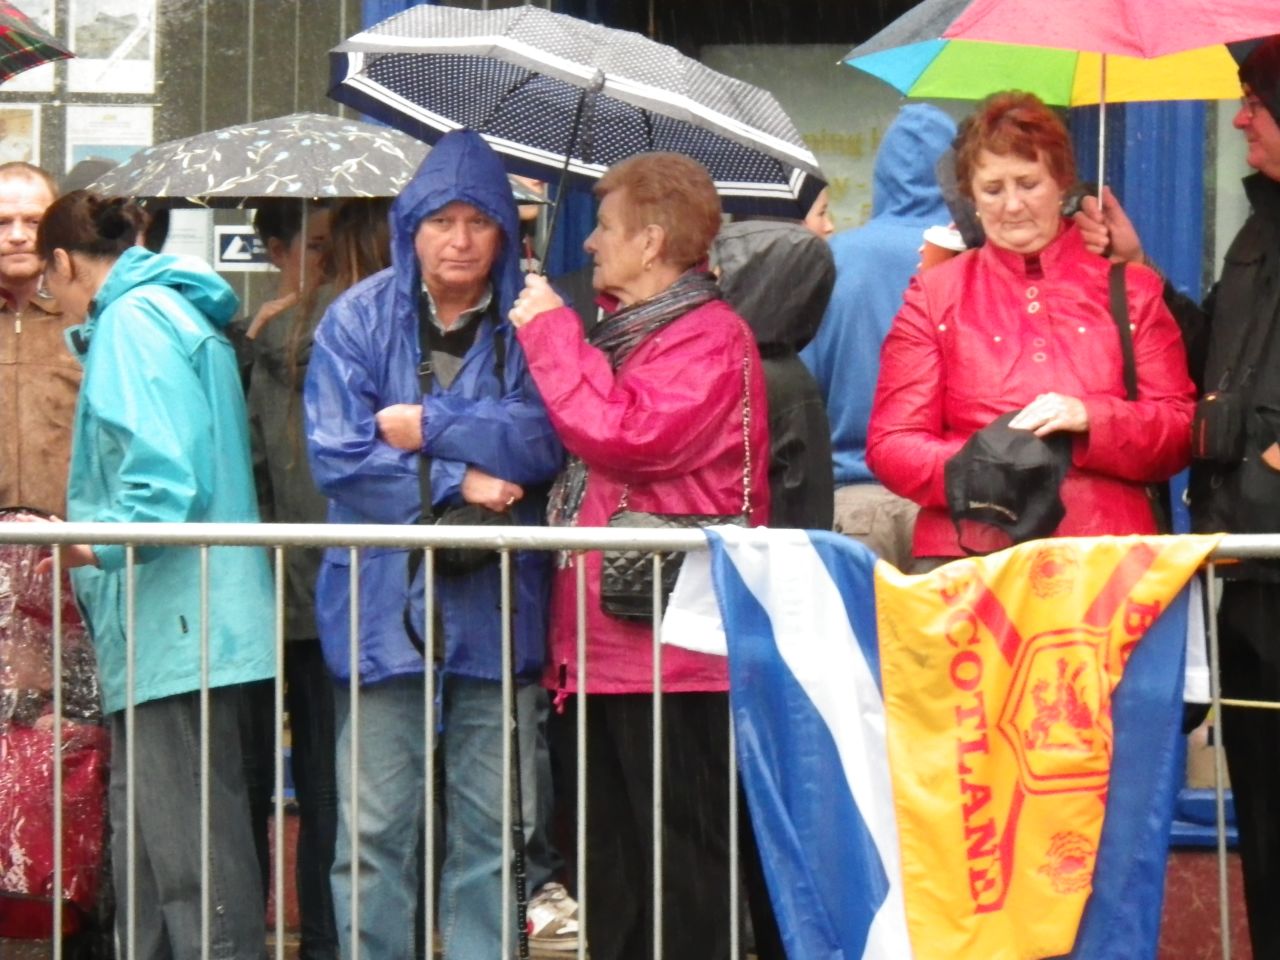 Despite wet weather, eager fans waited for a glimpse of the world No. 4.